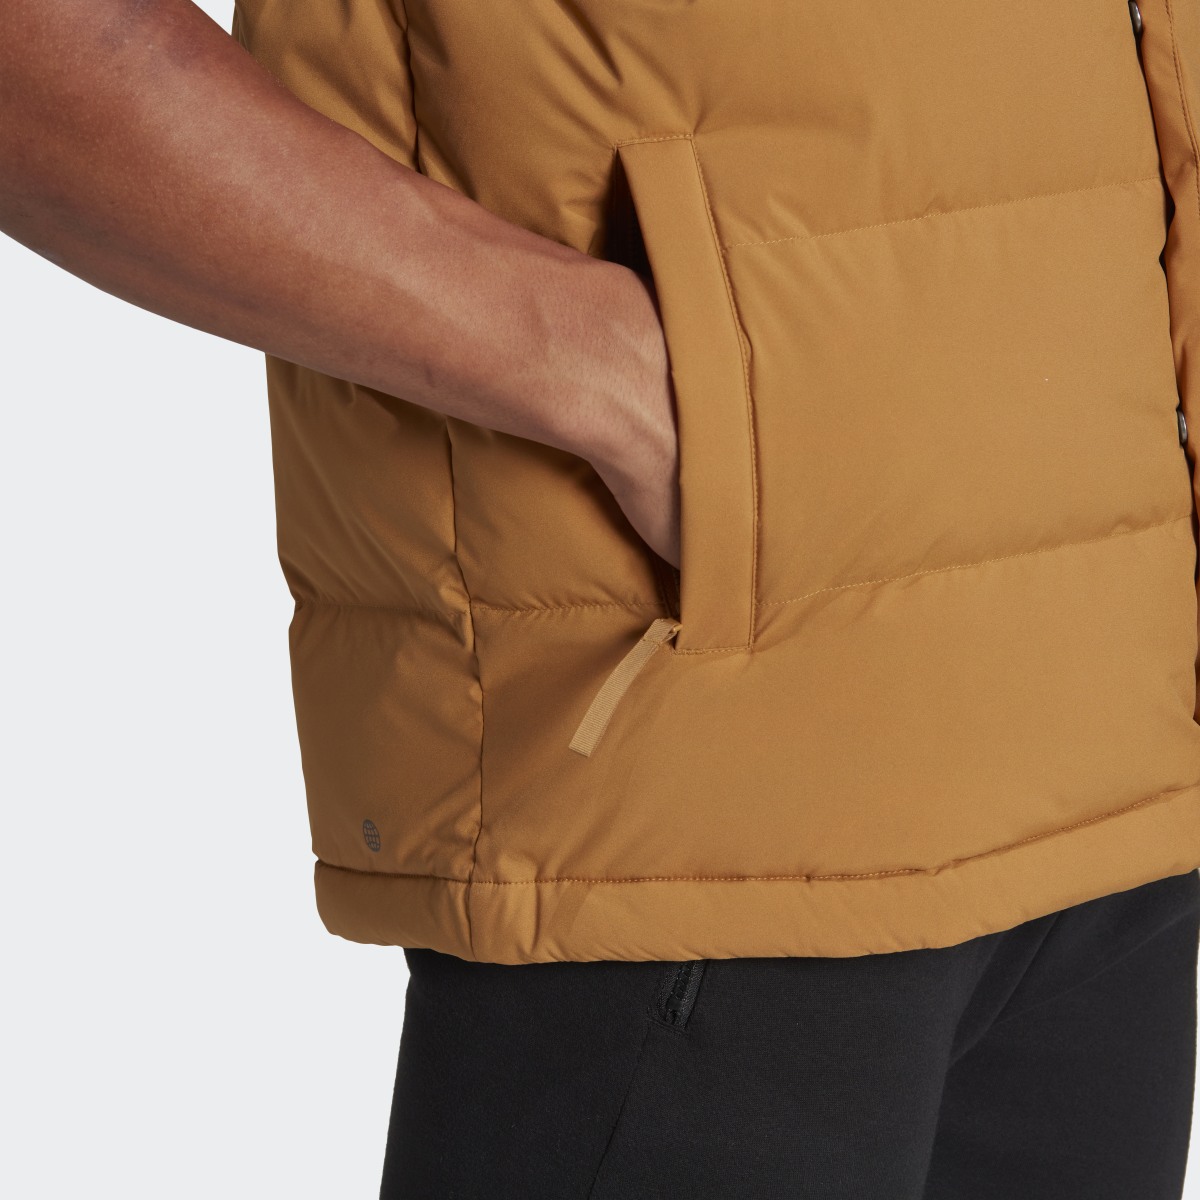 Adidas Helionic Hooded Down Vest. 7